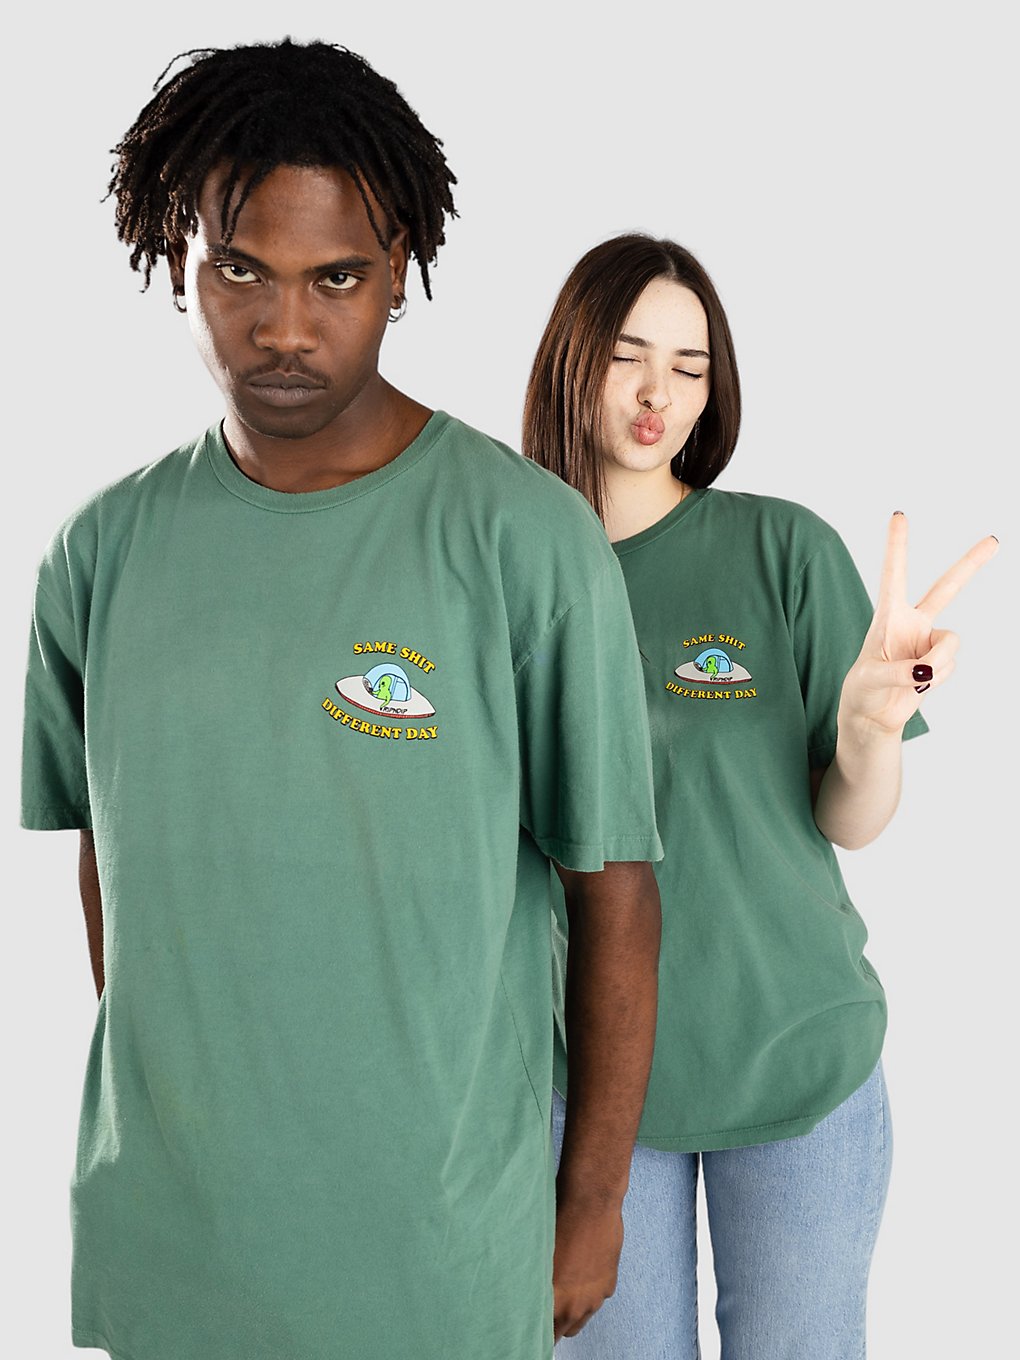 ripndip same shit different day t-shirt olive